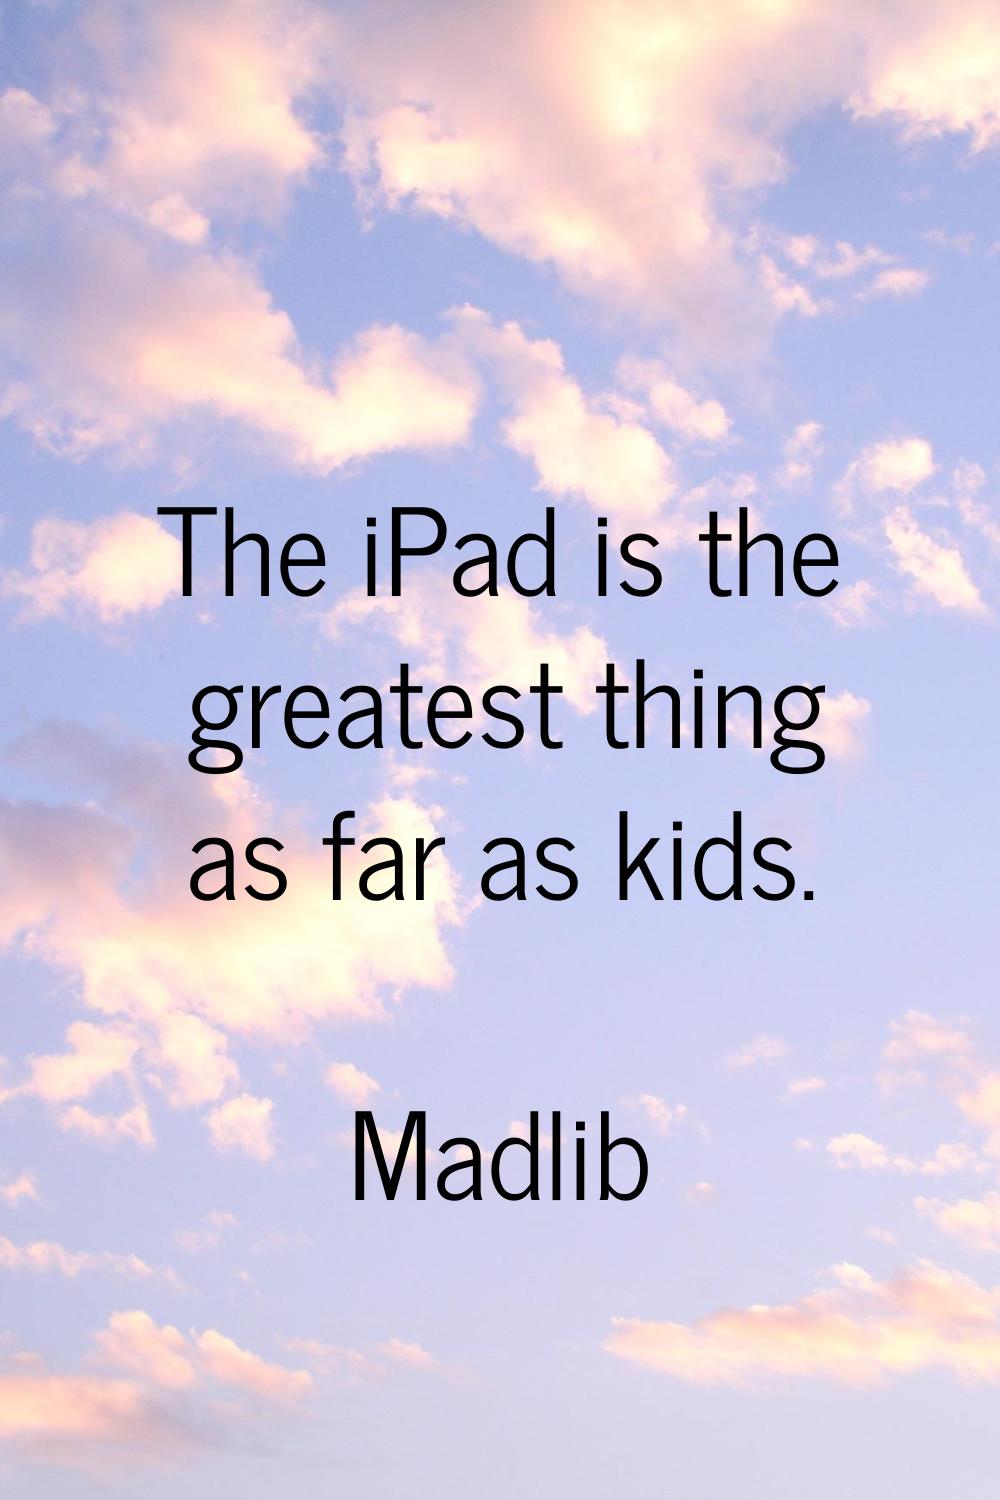 The iPad is the greatest thing as far as kids.